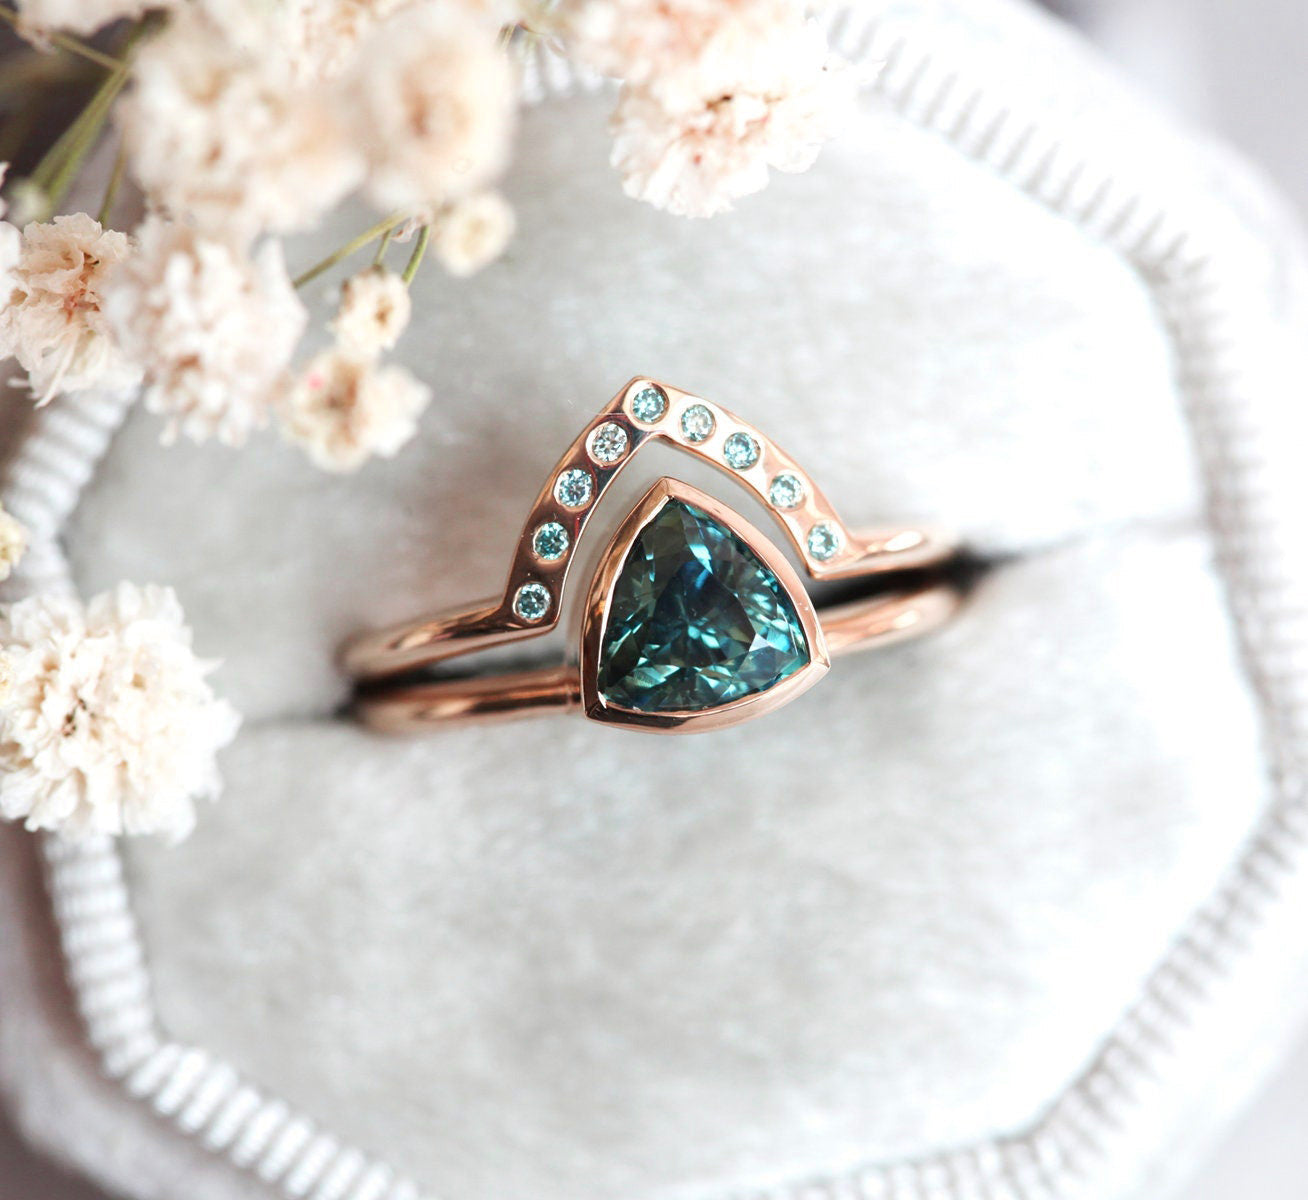 Teal Trillion Sapphire Ring With Blue Diamond Band, Trillion Sapphire Engagement Ring Solitaire With Teal Blue Diamond Ring, Matching Set-Capucinne